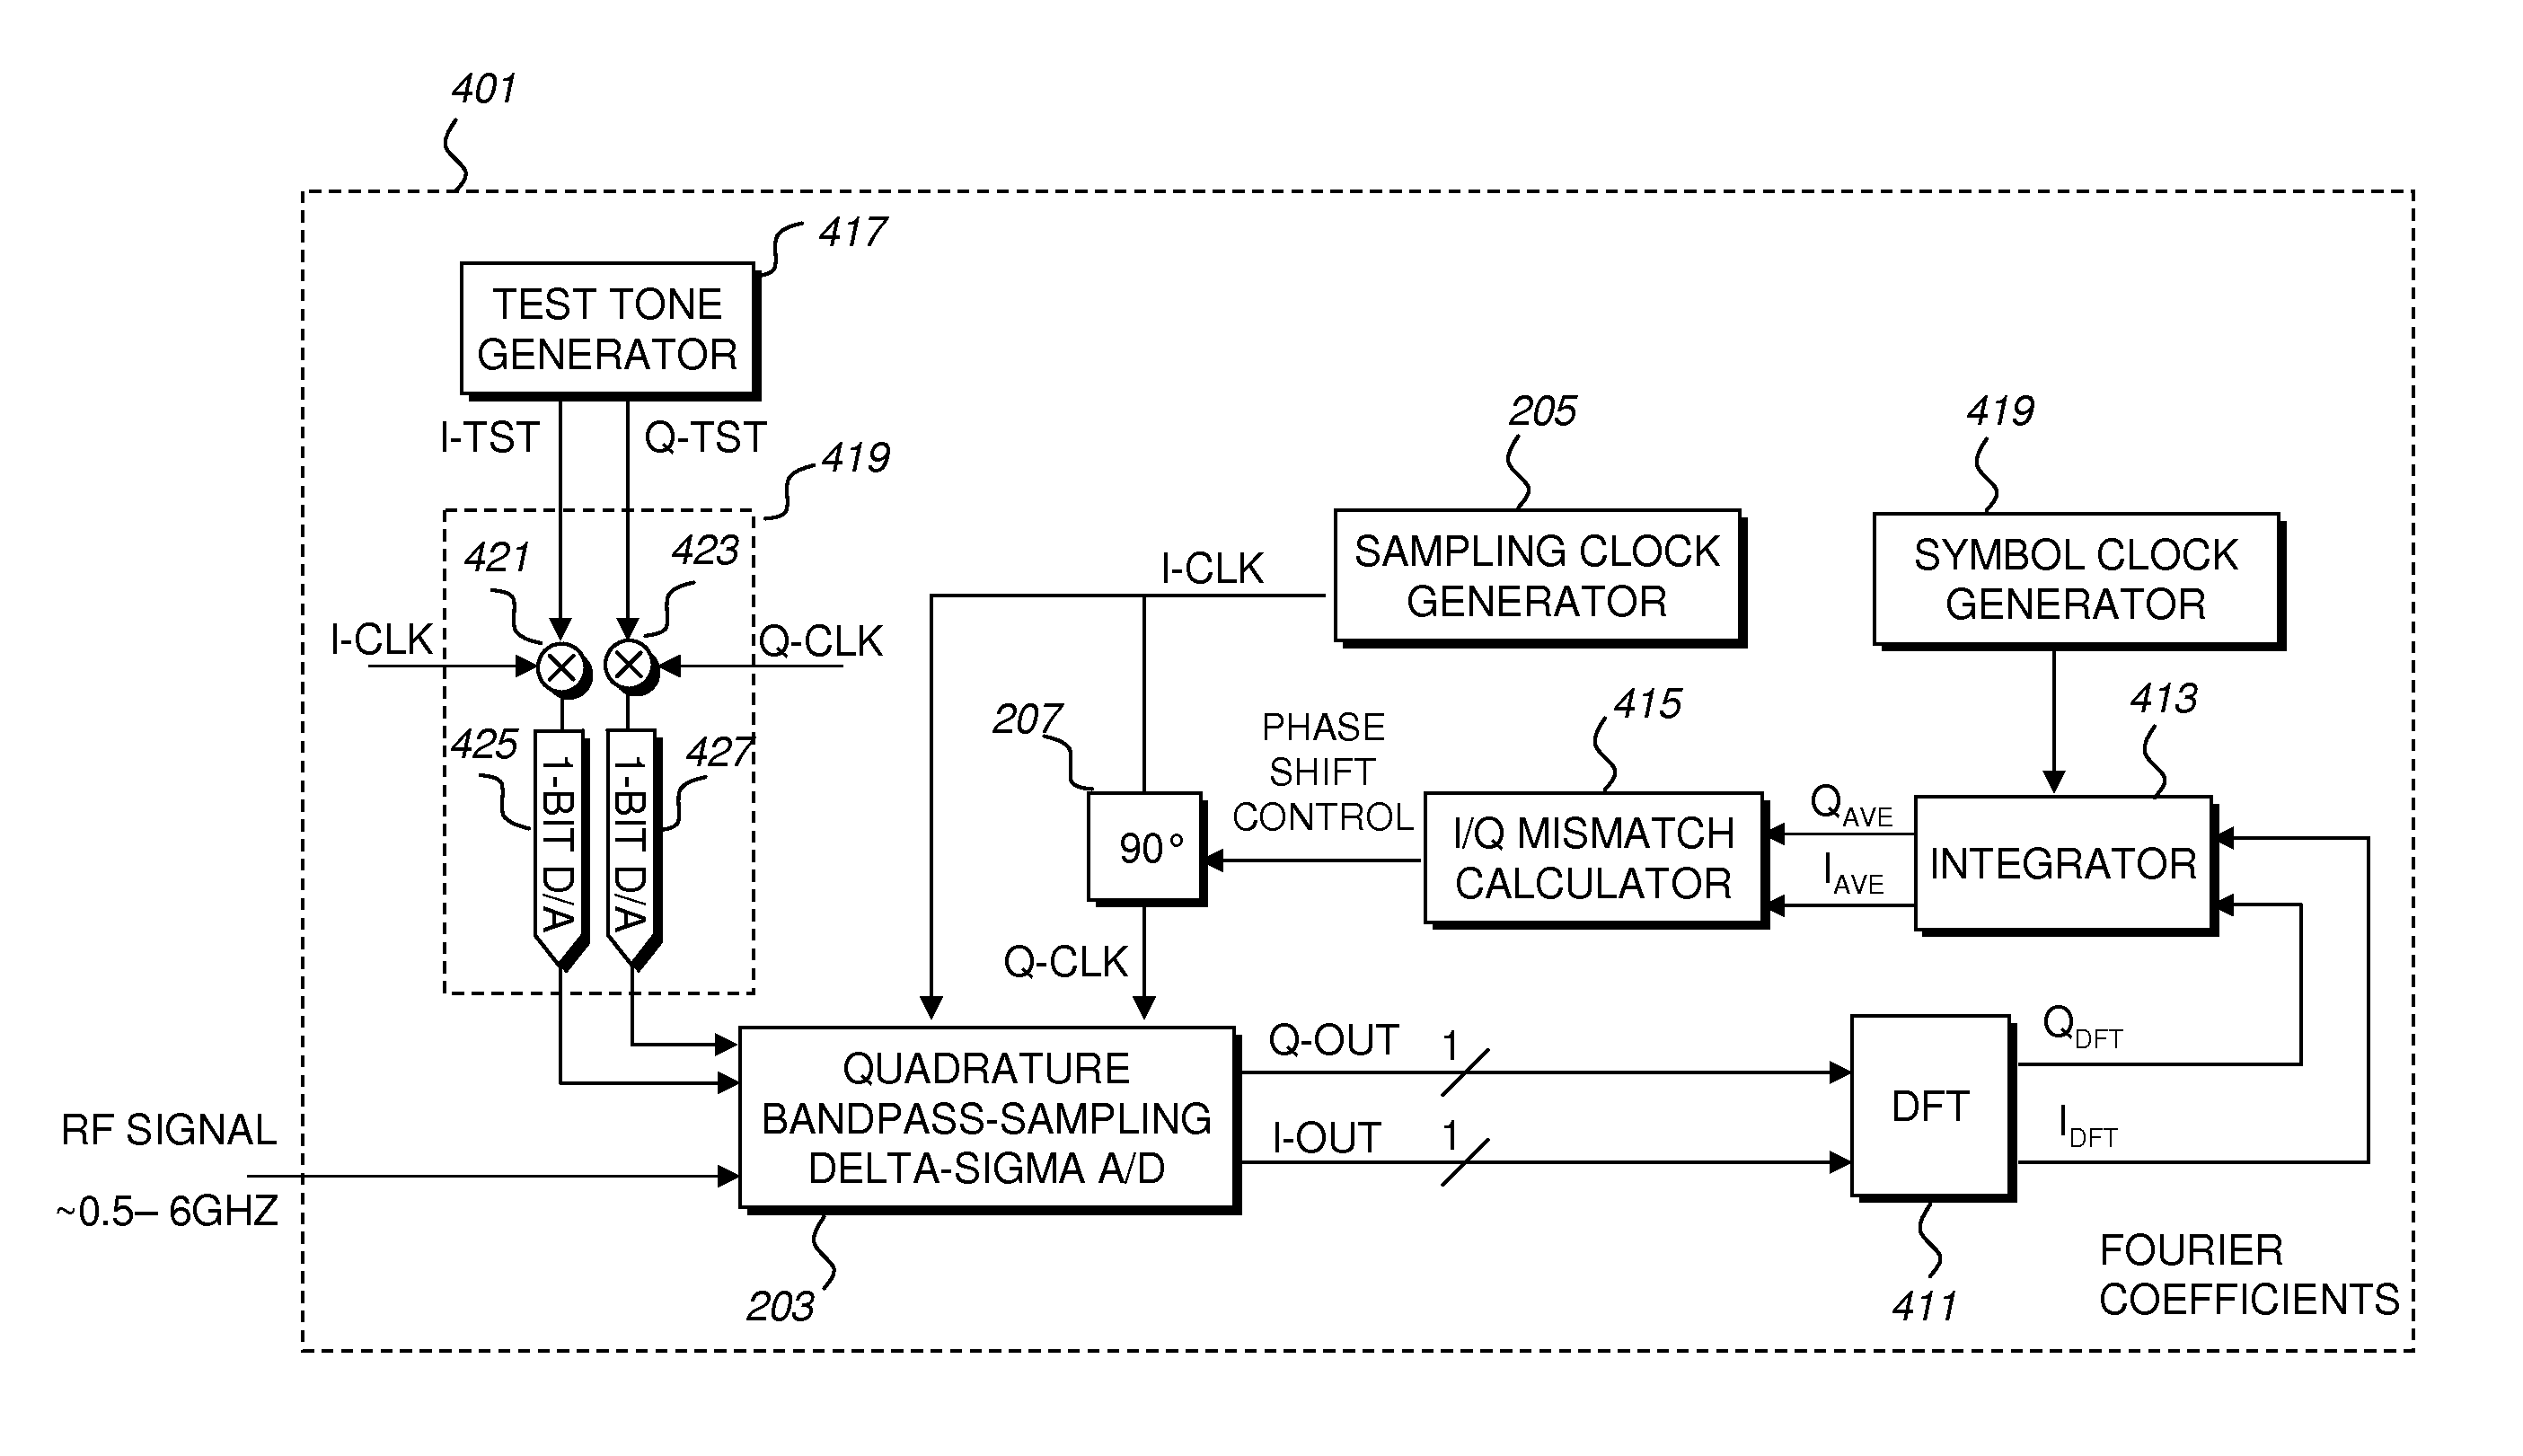 Apparatus and method for calibrating the I/Q mismatch in a quadrature bandpass sampling receiver